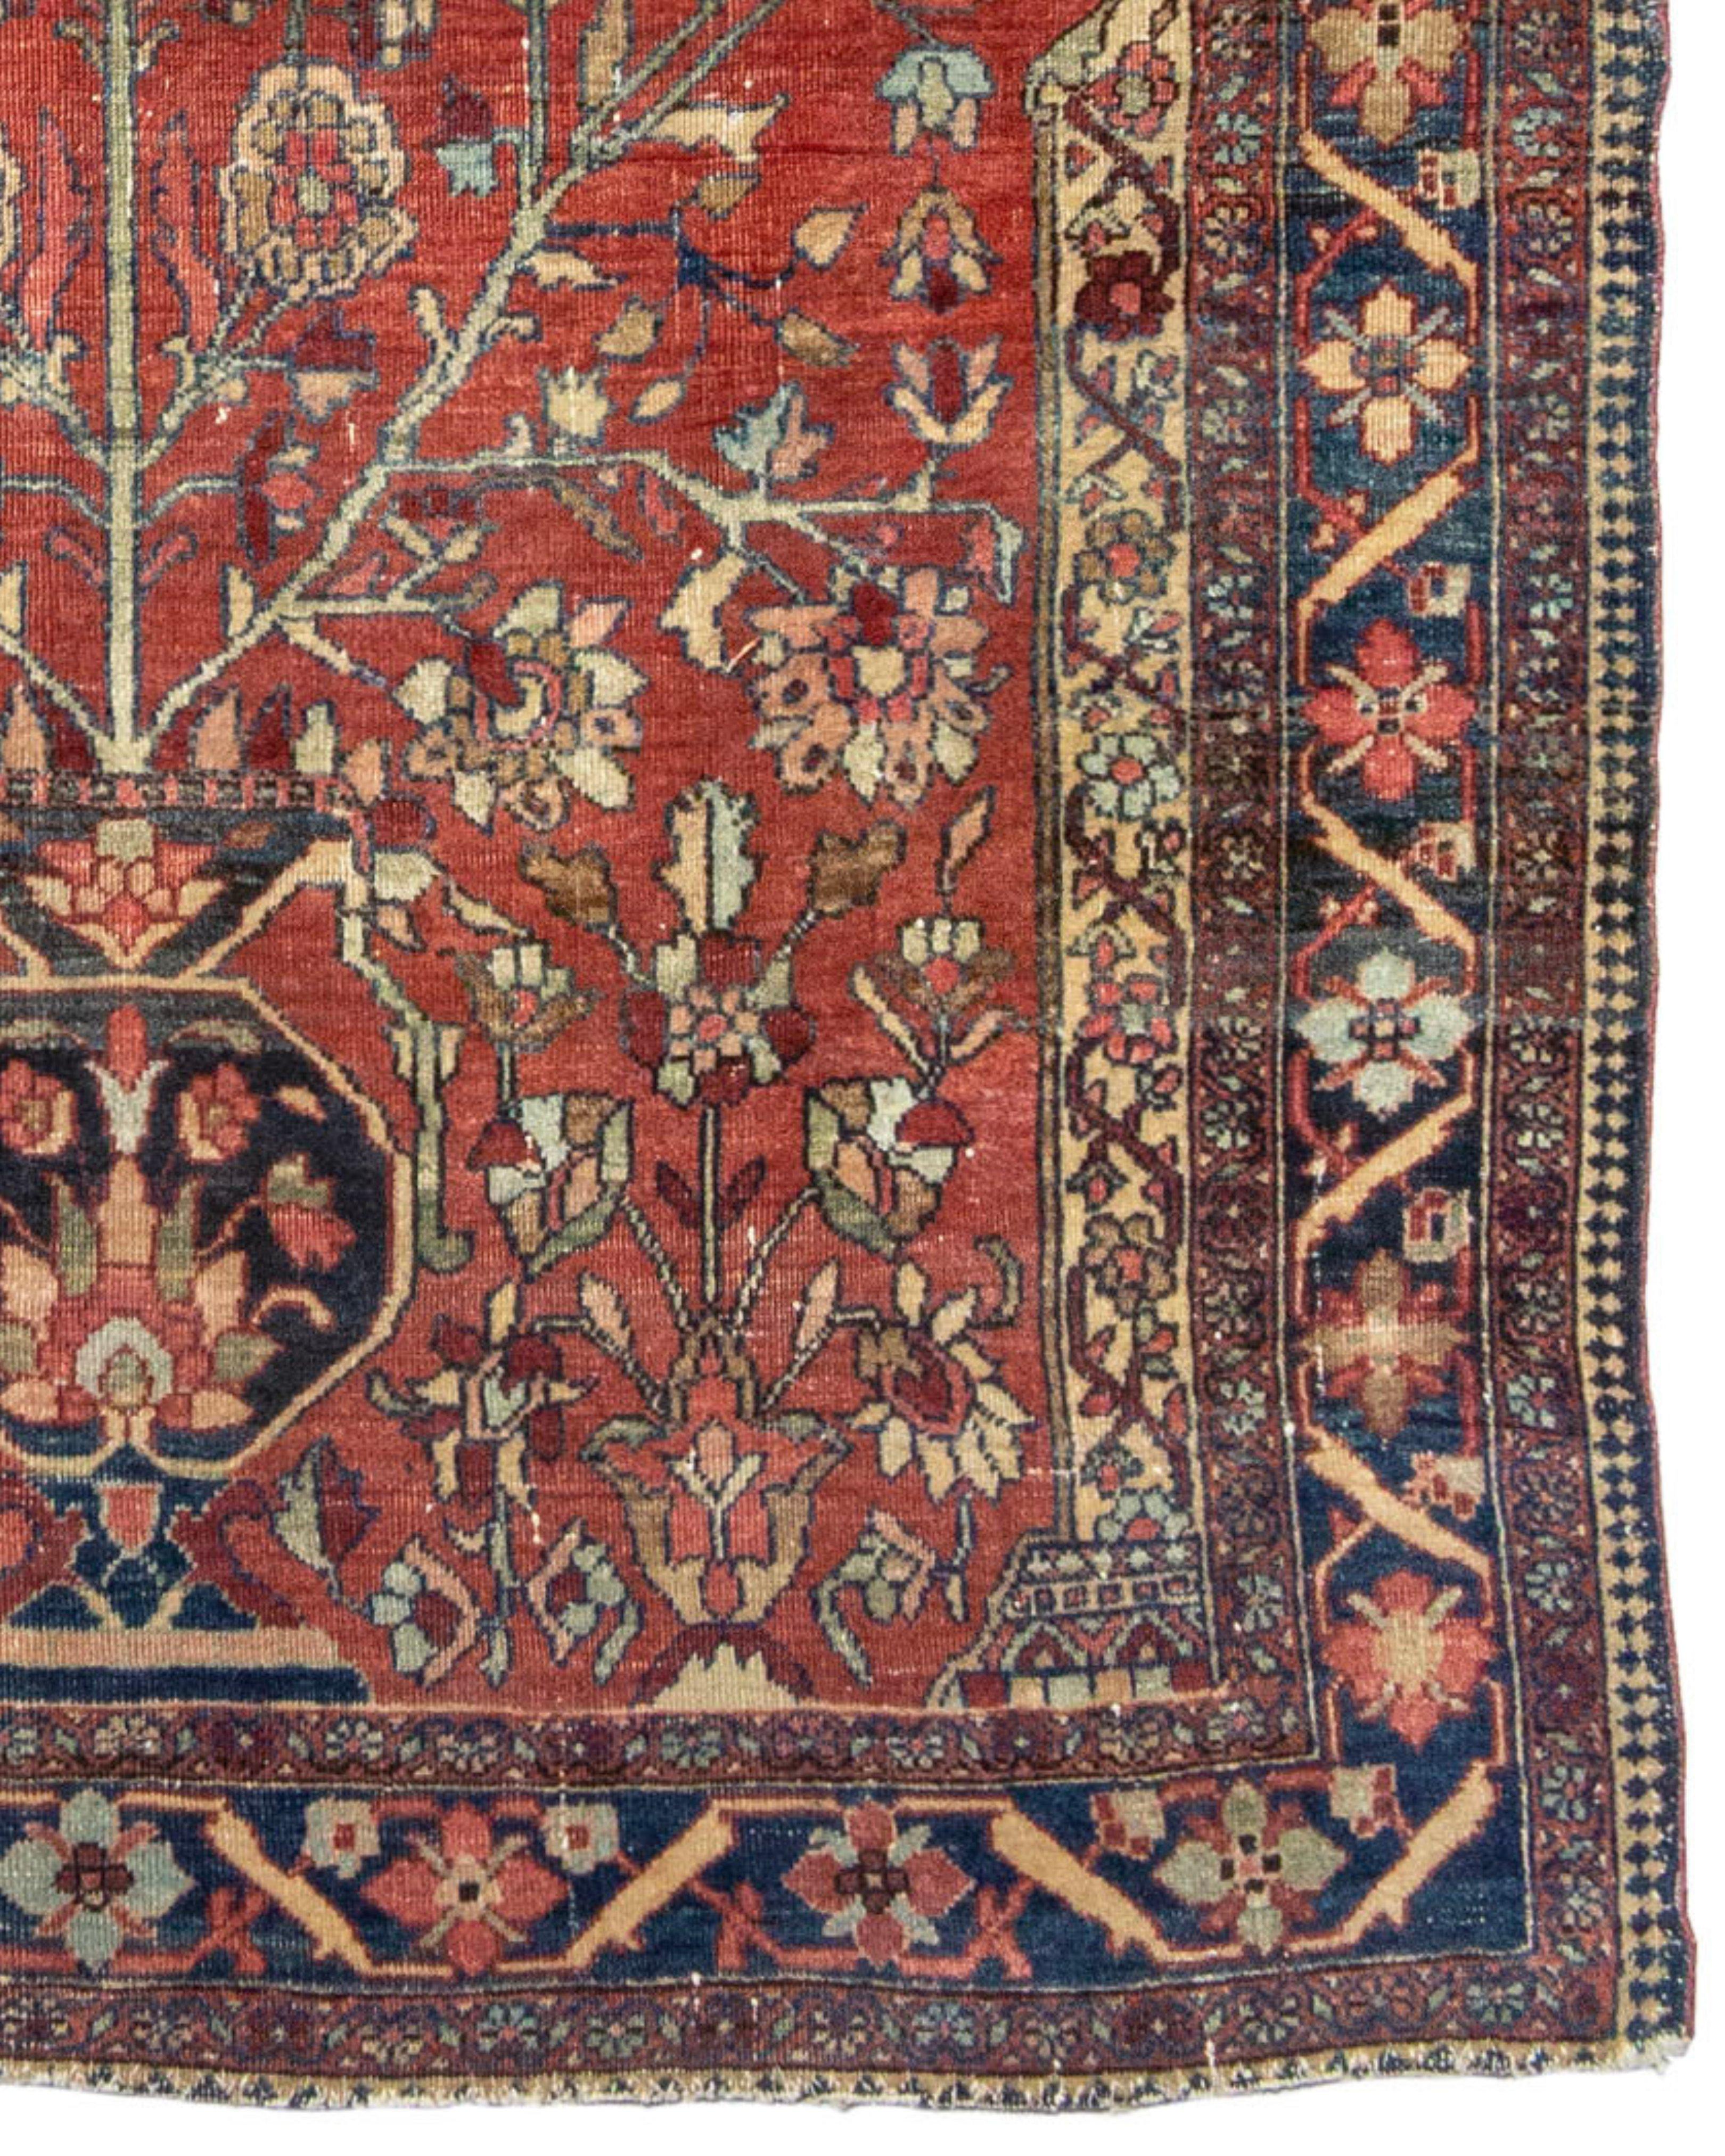 Wool Antique Persian Fereghan Sarouk Rug, Late 19th Century For Sale